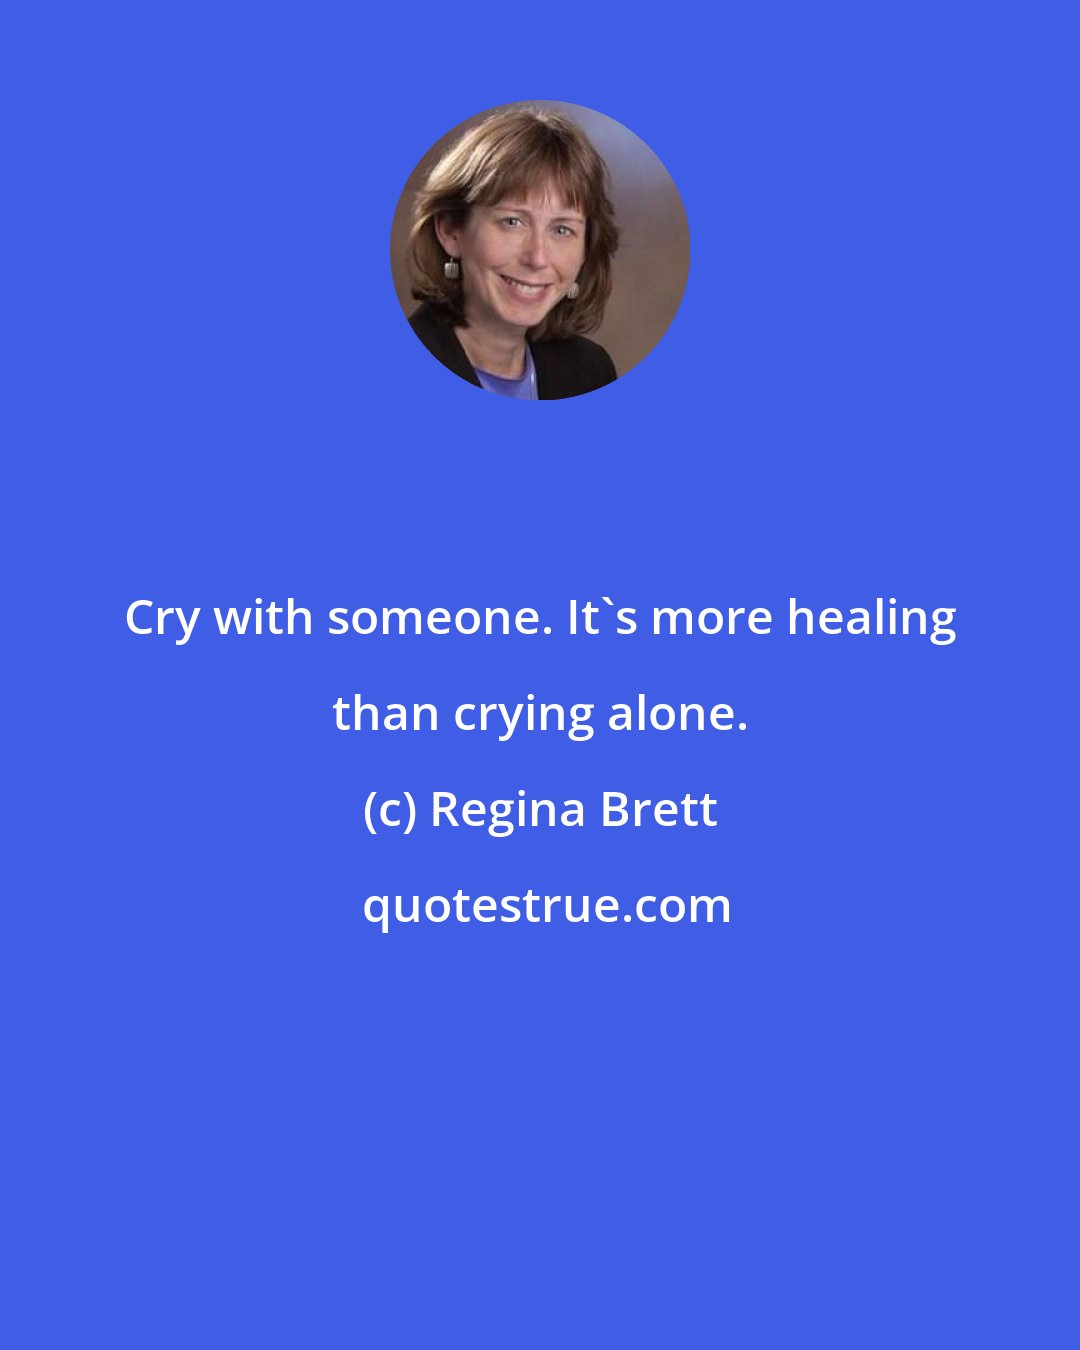 Regina Brett: Cry with someone. It's more healing than crying alone.